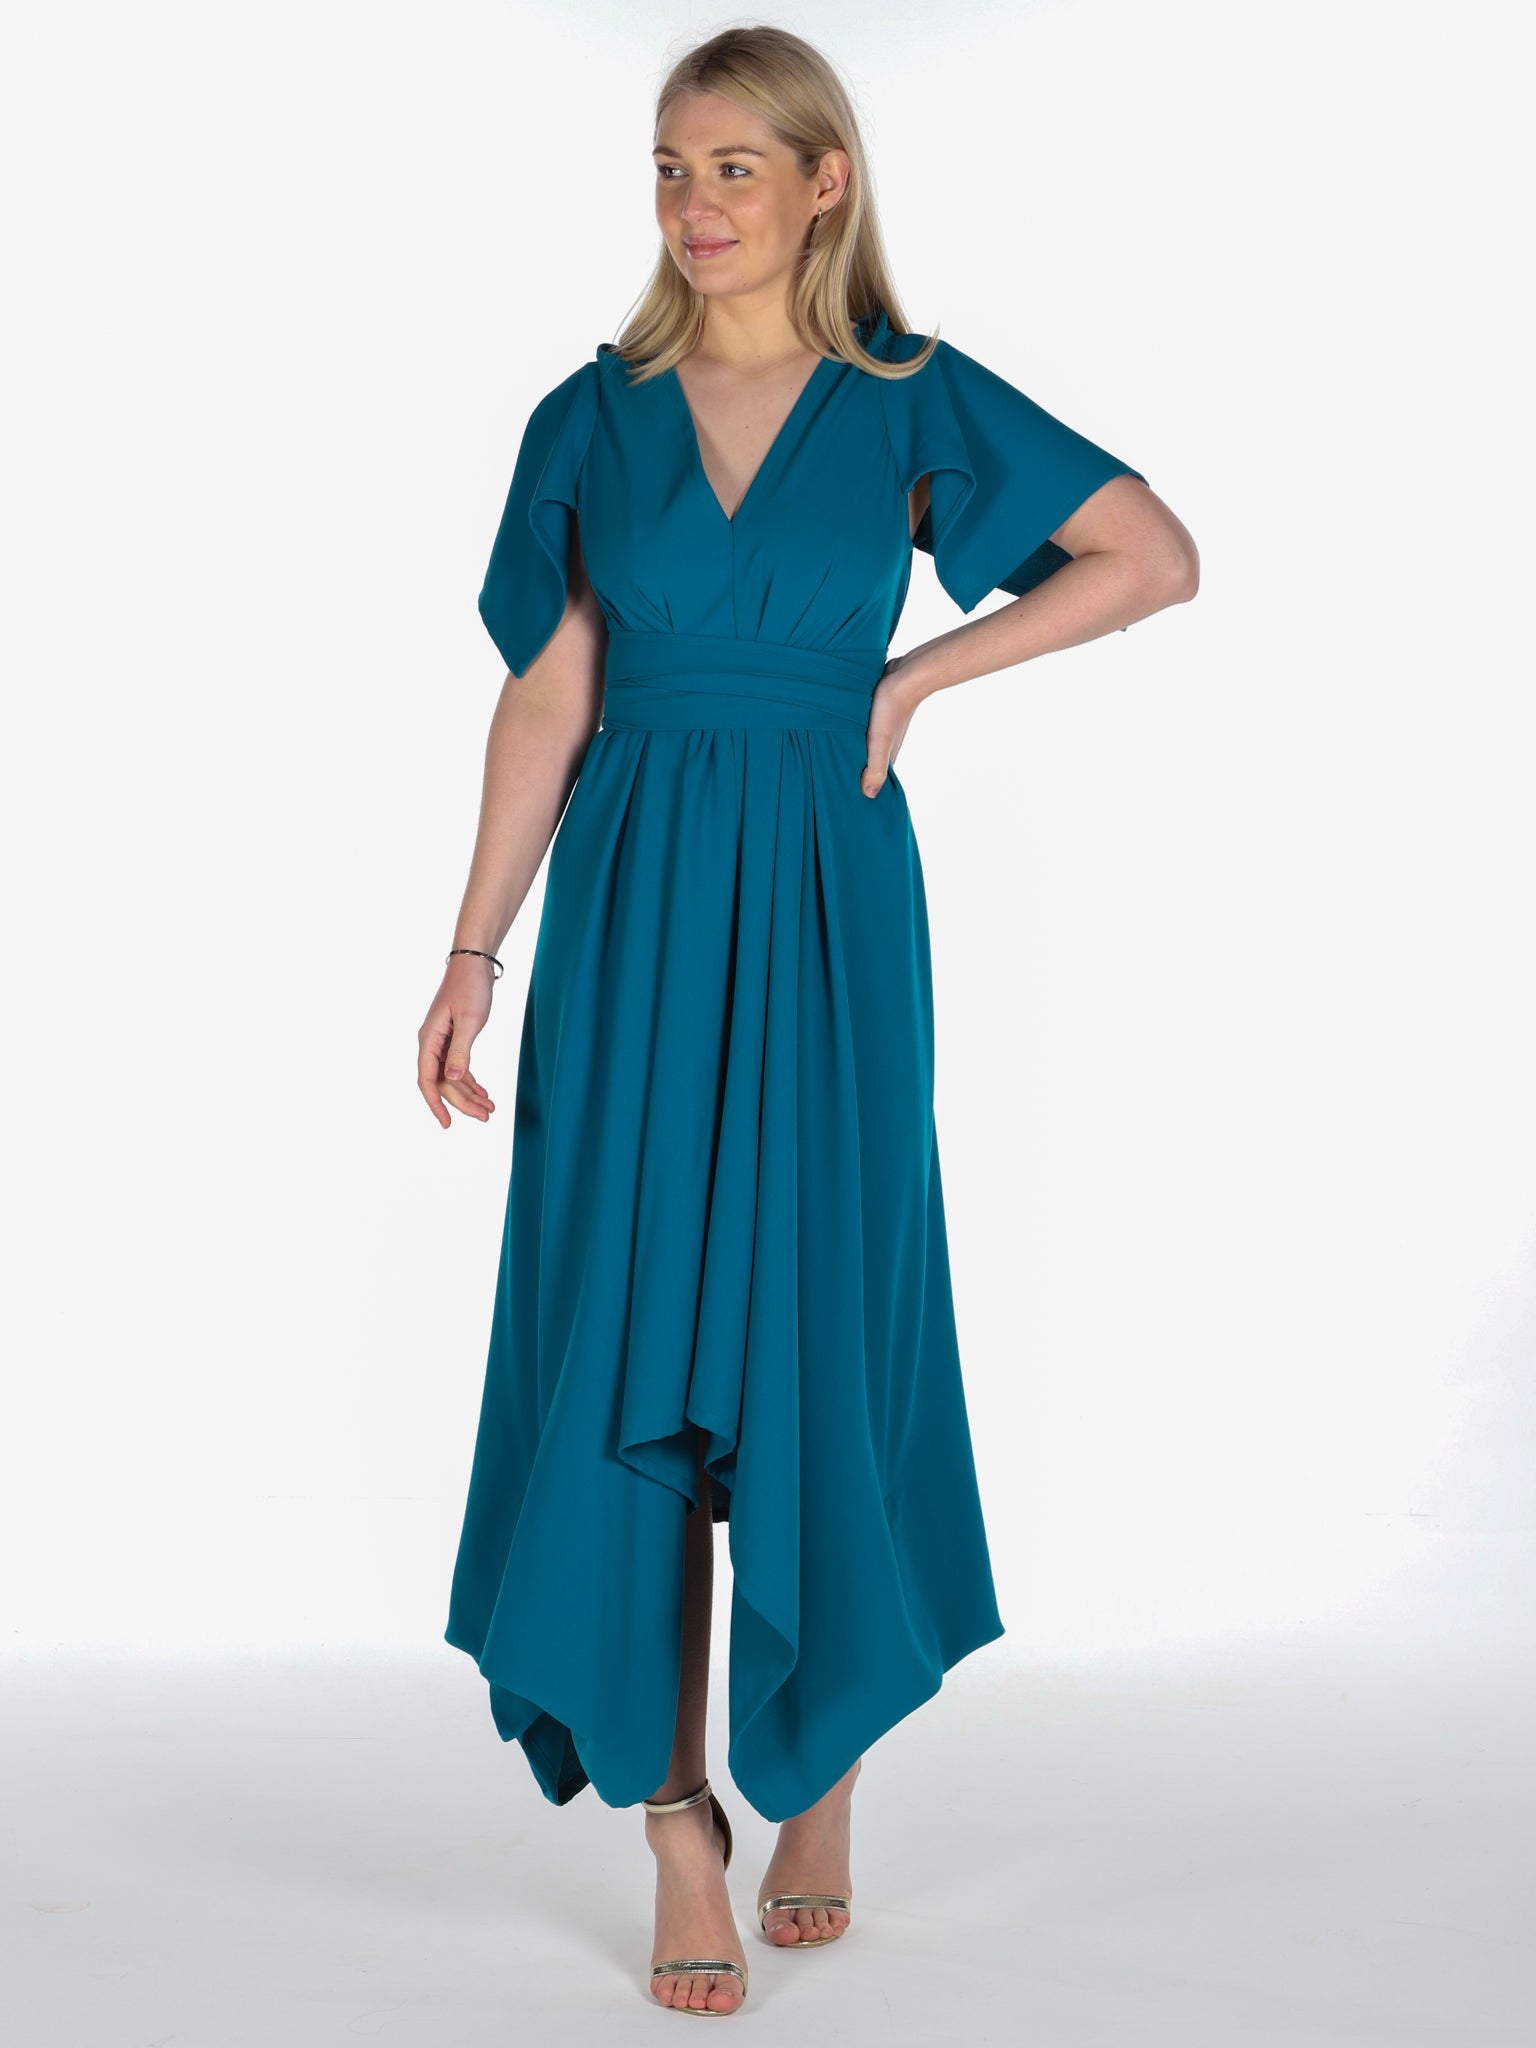 Teal Darcy Dress with Sleeves